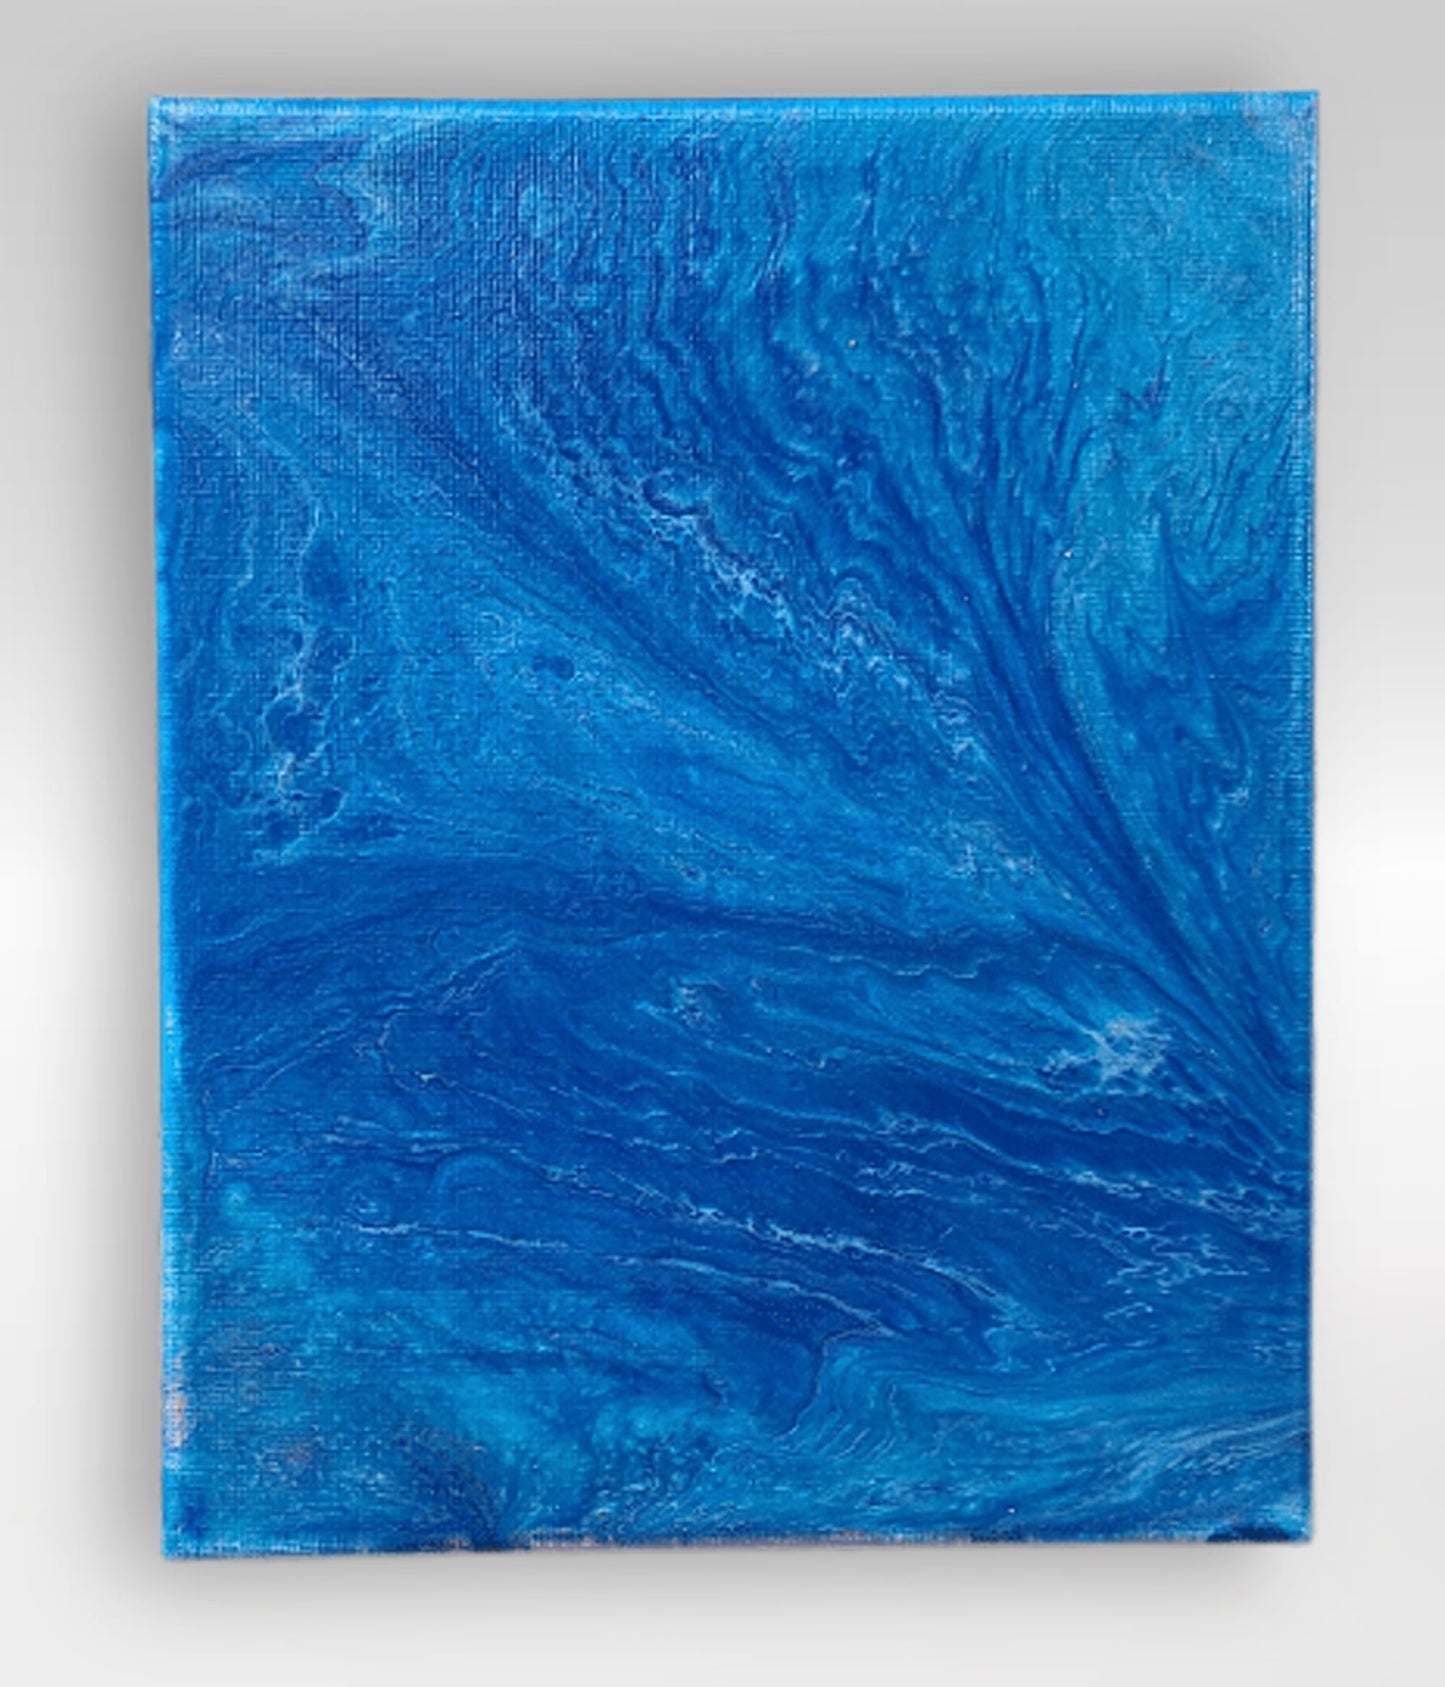 The Deep – 8 x 10 Acrylic Pour Painting On Canvas